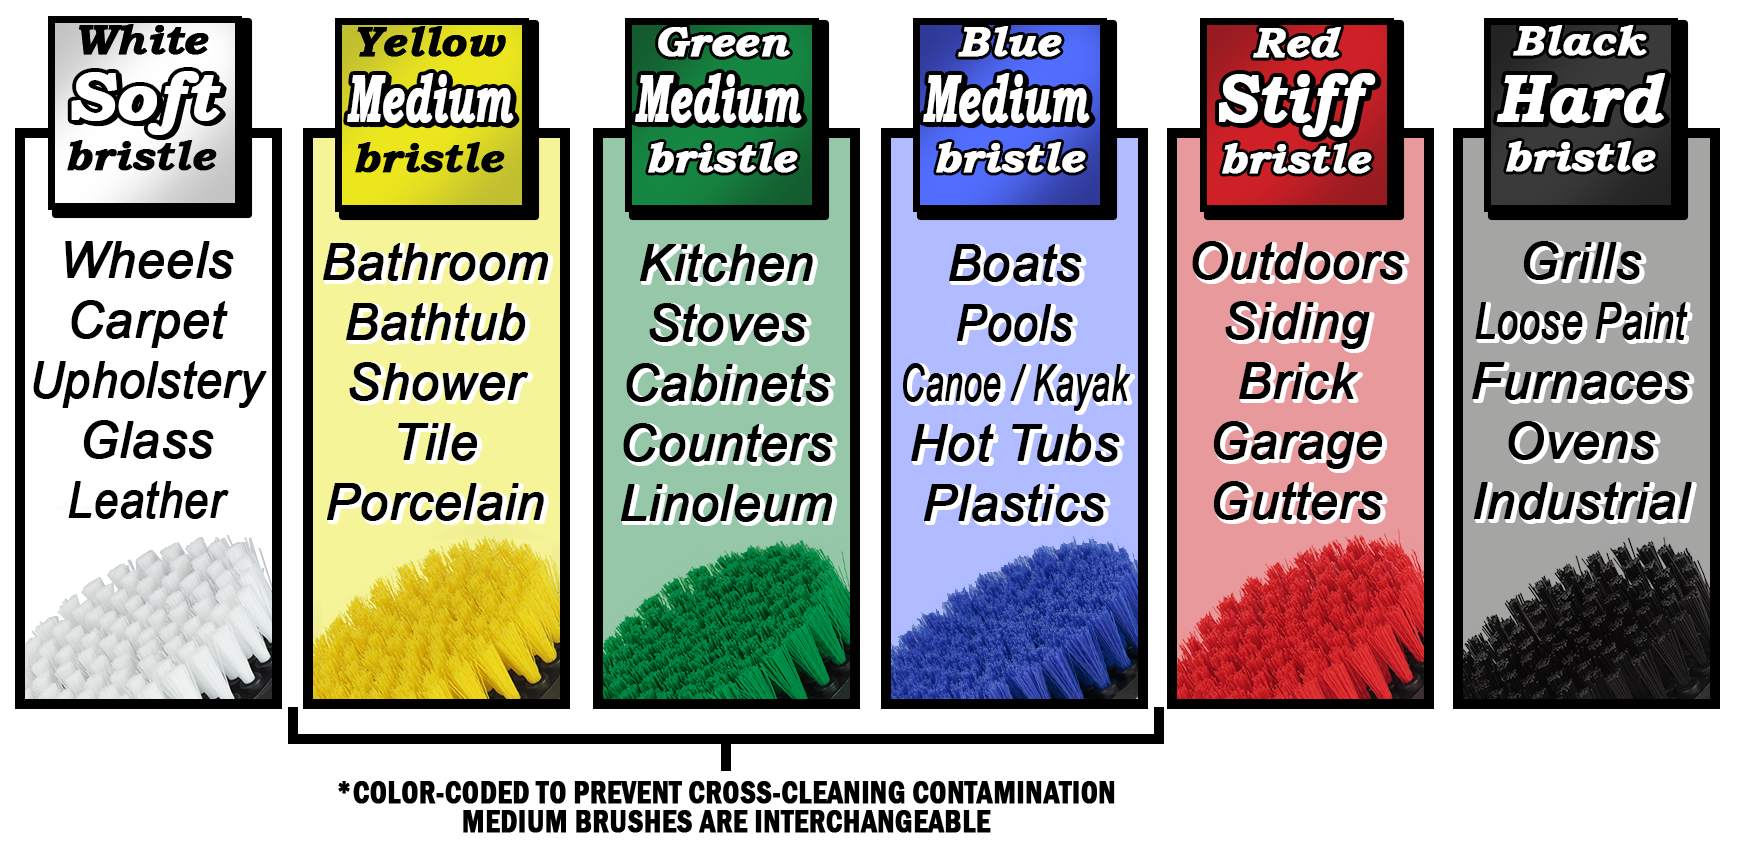 Drillbrush Cleaning Brushes for Drill, Outdoor, Concrete, Garden, Patio,  Bird Bath, Headstones, R-S-42-QC-DB